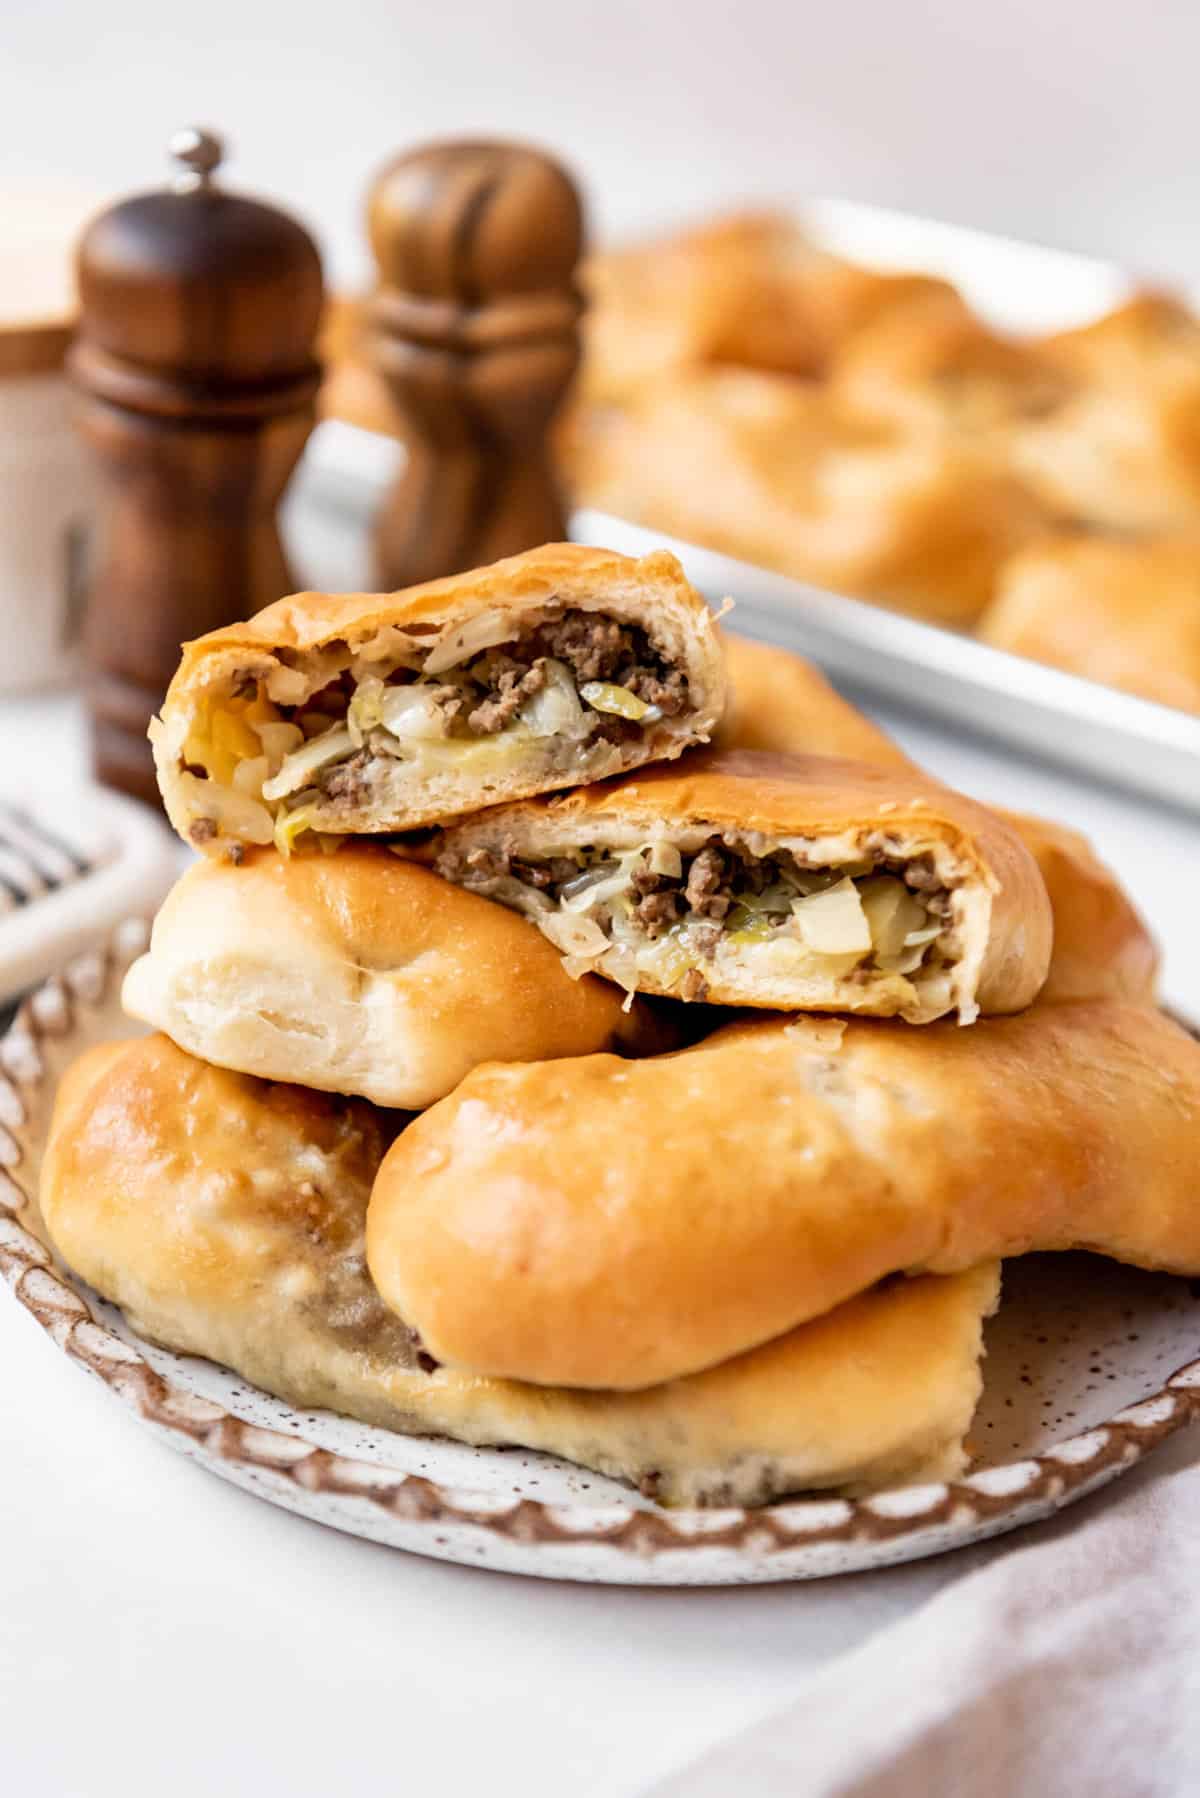 Homemade runzas on a plate with one of them cut in half to show the filling inside.